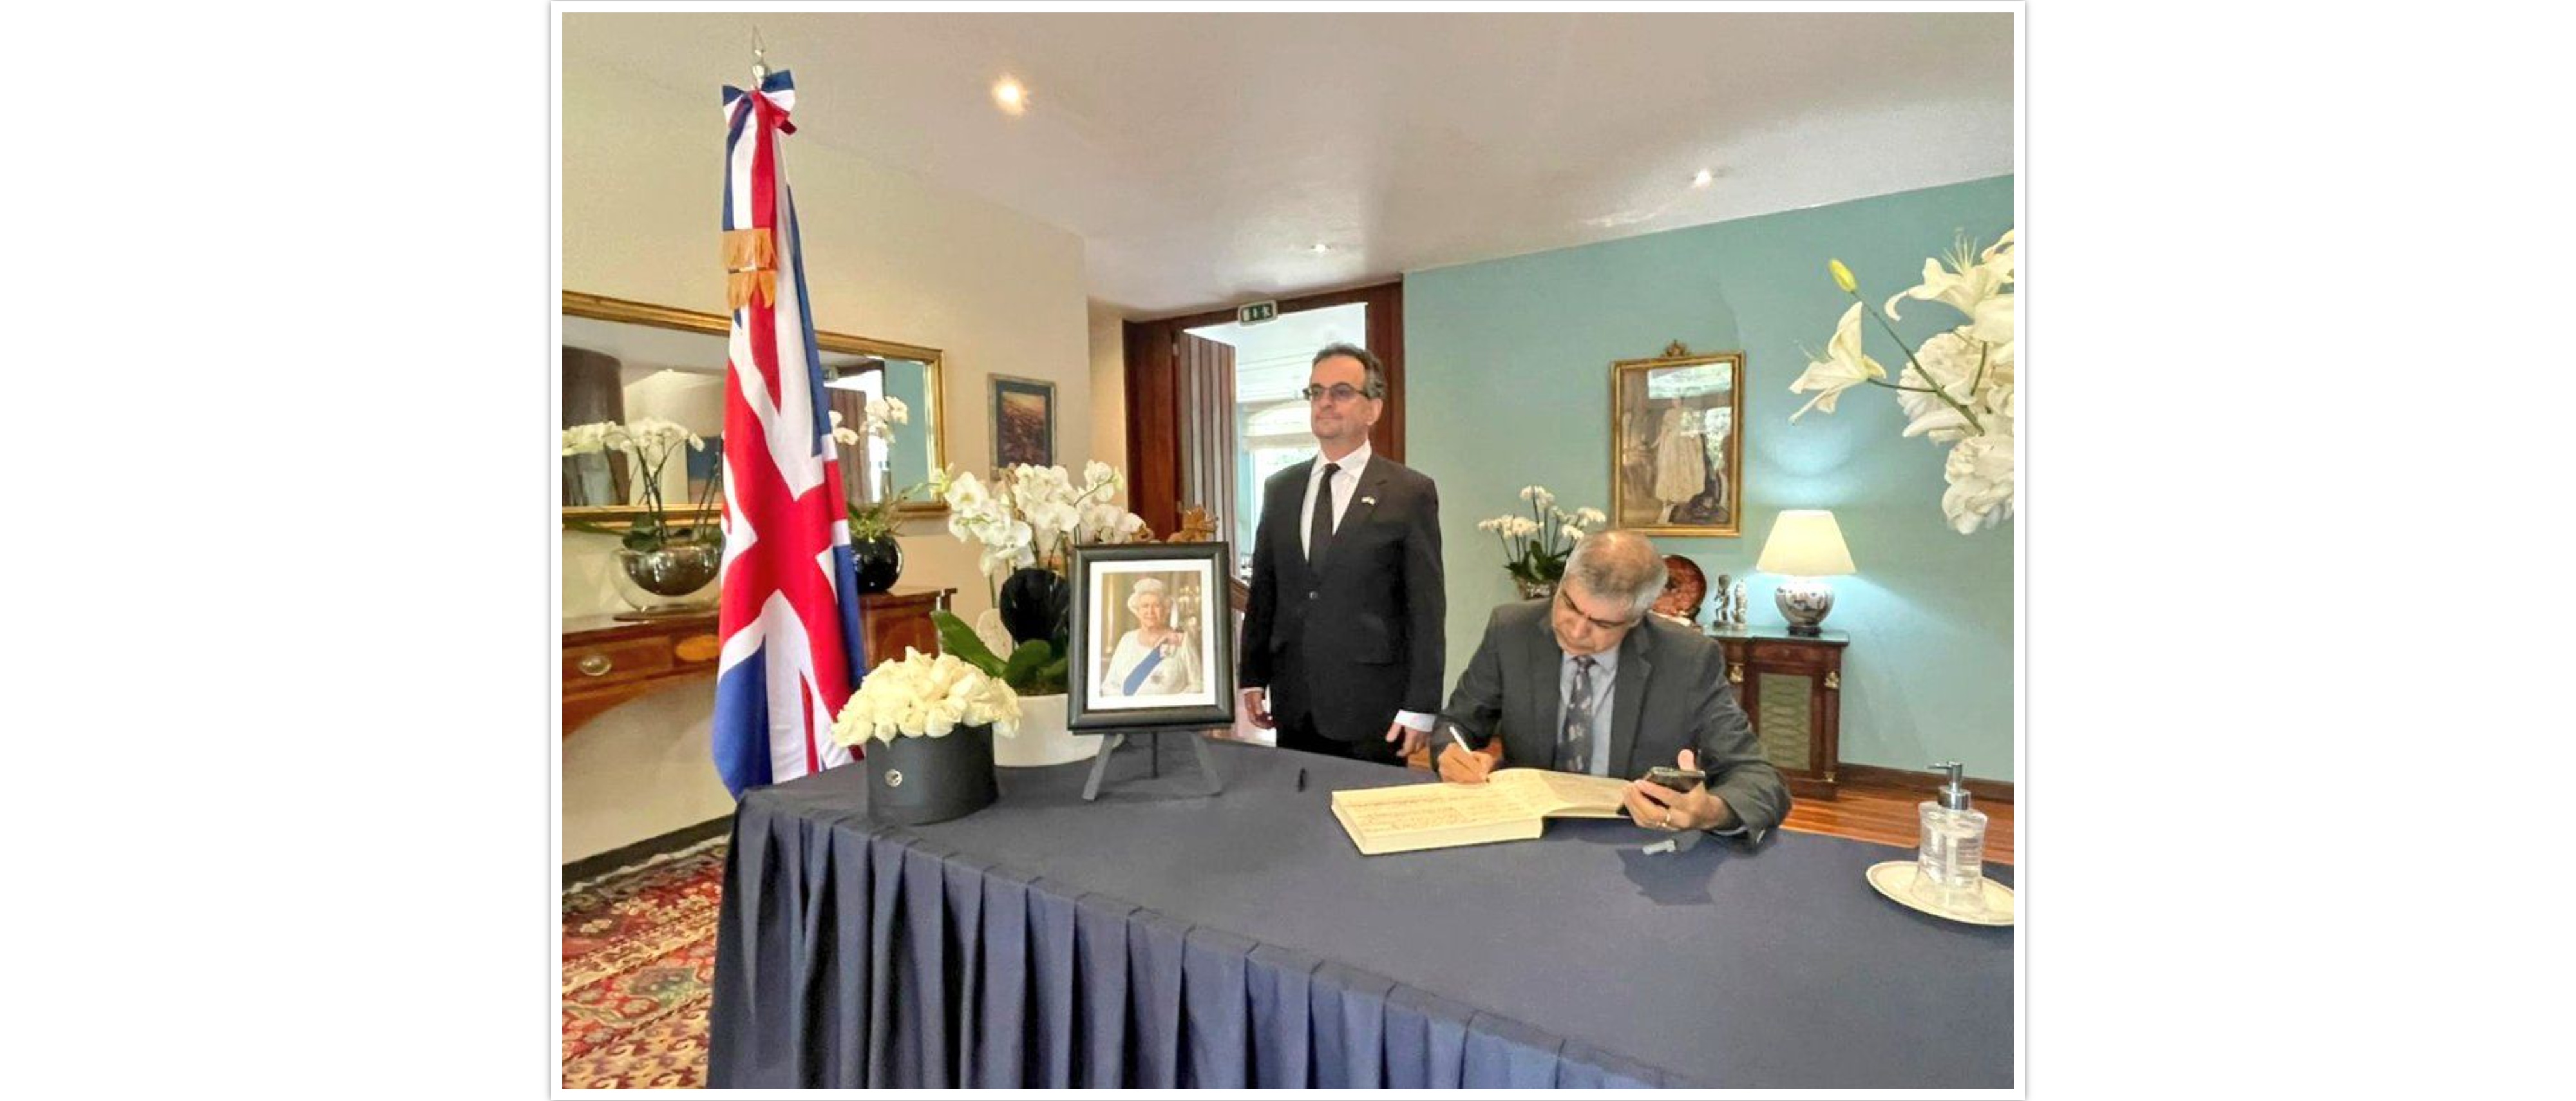  <div style="fcolor: #fff; font-weight: 600; font-size: 1.5em;">
<p style="font-size: 13.8px;">Ambassador Pankaj Sharma signed the condolence book for Queen Elizabeth II at the British Ambassador's Residence in Mexico City.


<br /><span style="text-align: center;">12 September 2022</span></p>
</div>